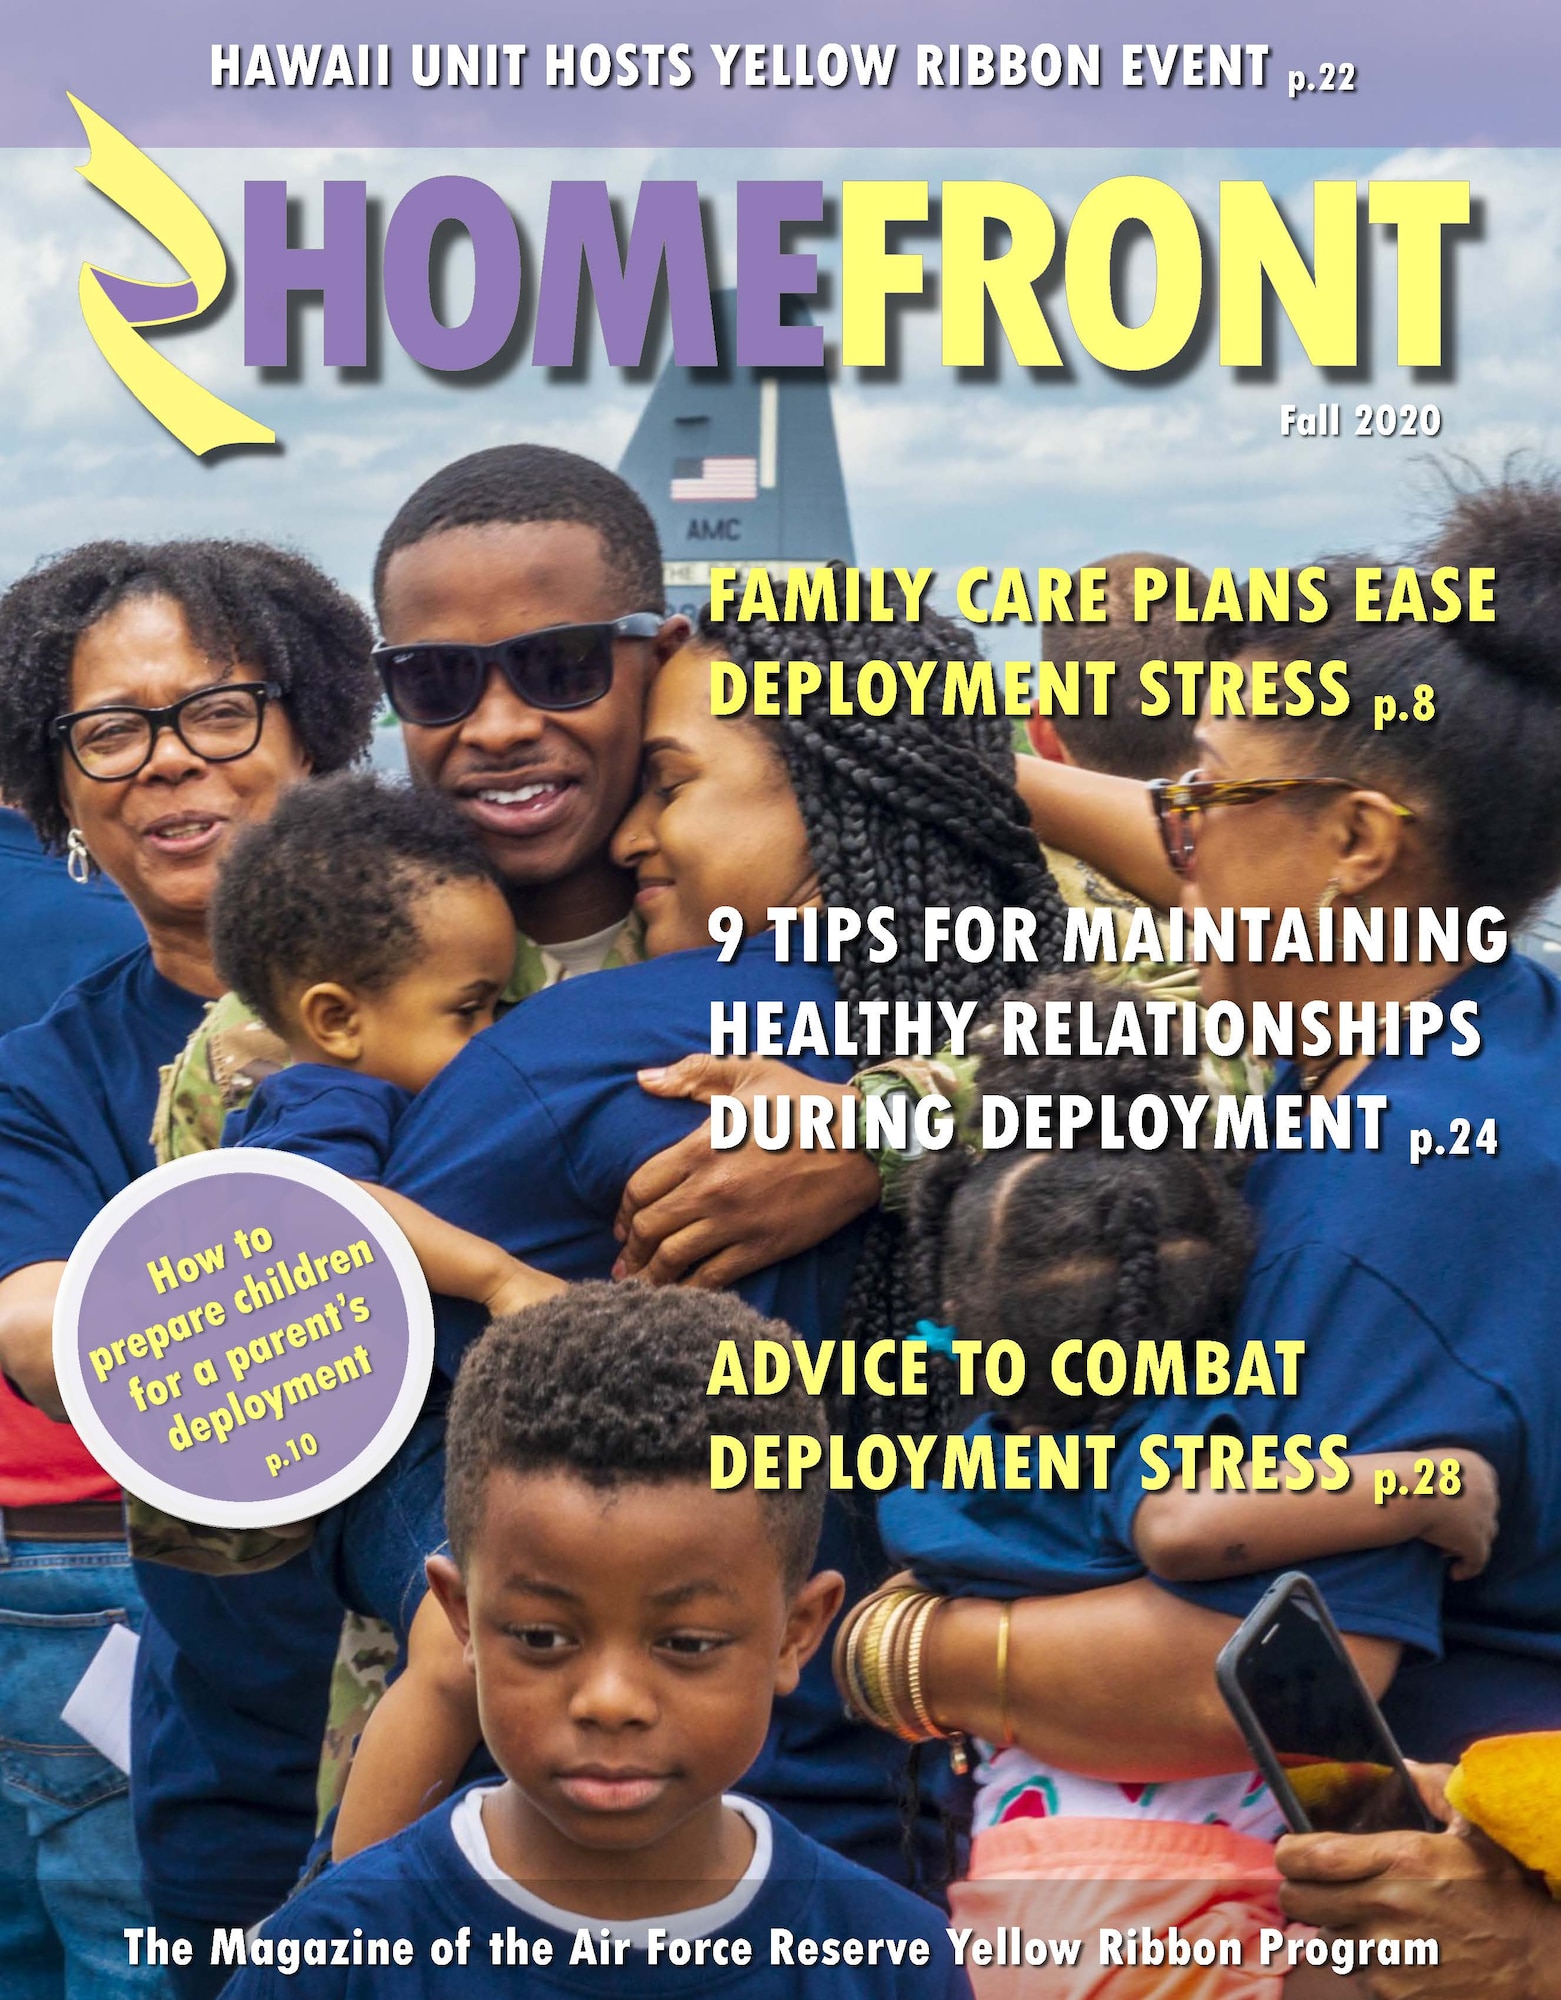 HOMEFRONT Magazine cover for Fall 2020.